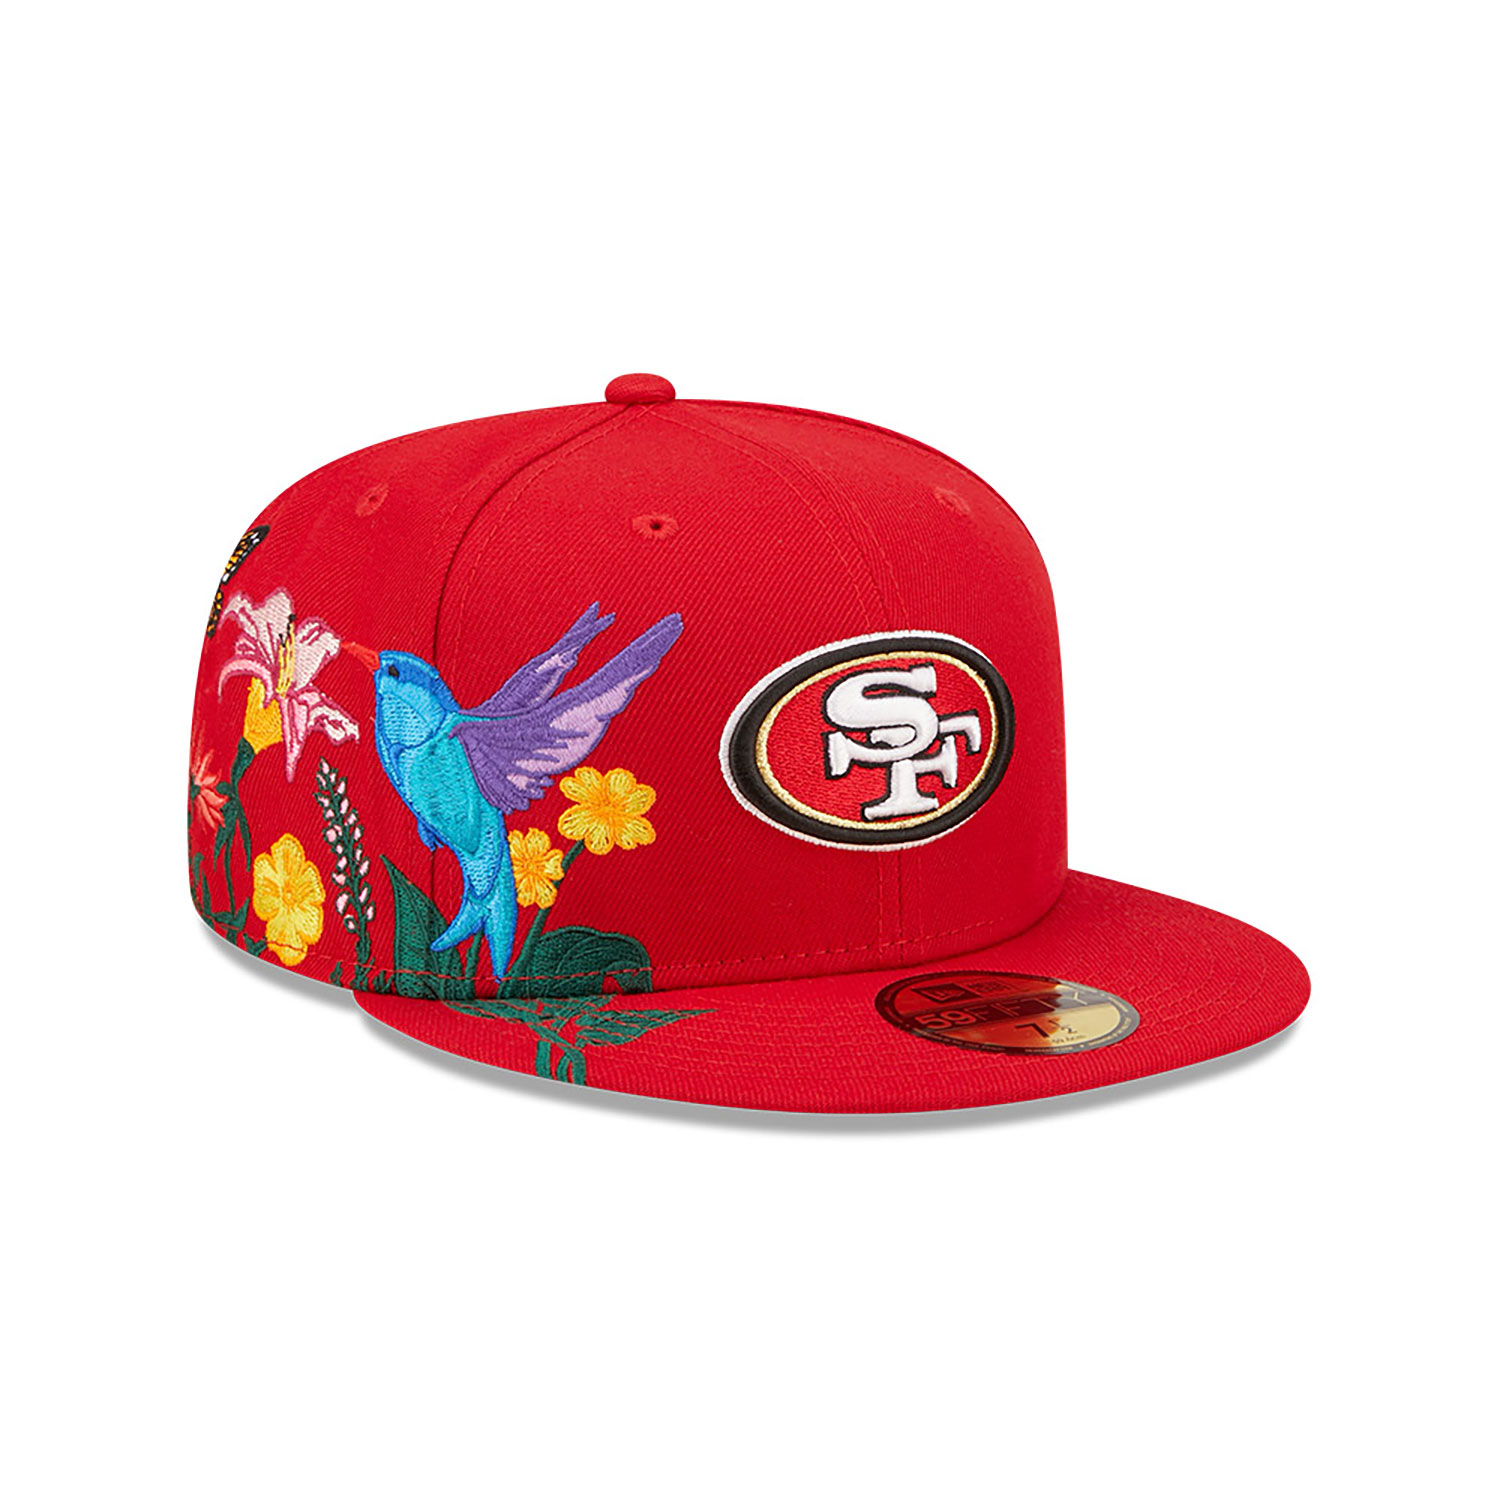 Official New Era San Francisco 49ers NFL Blooming Red 59FIFTY Fitted Cap